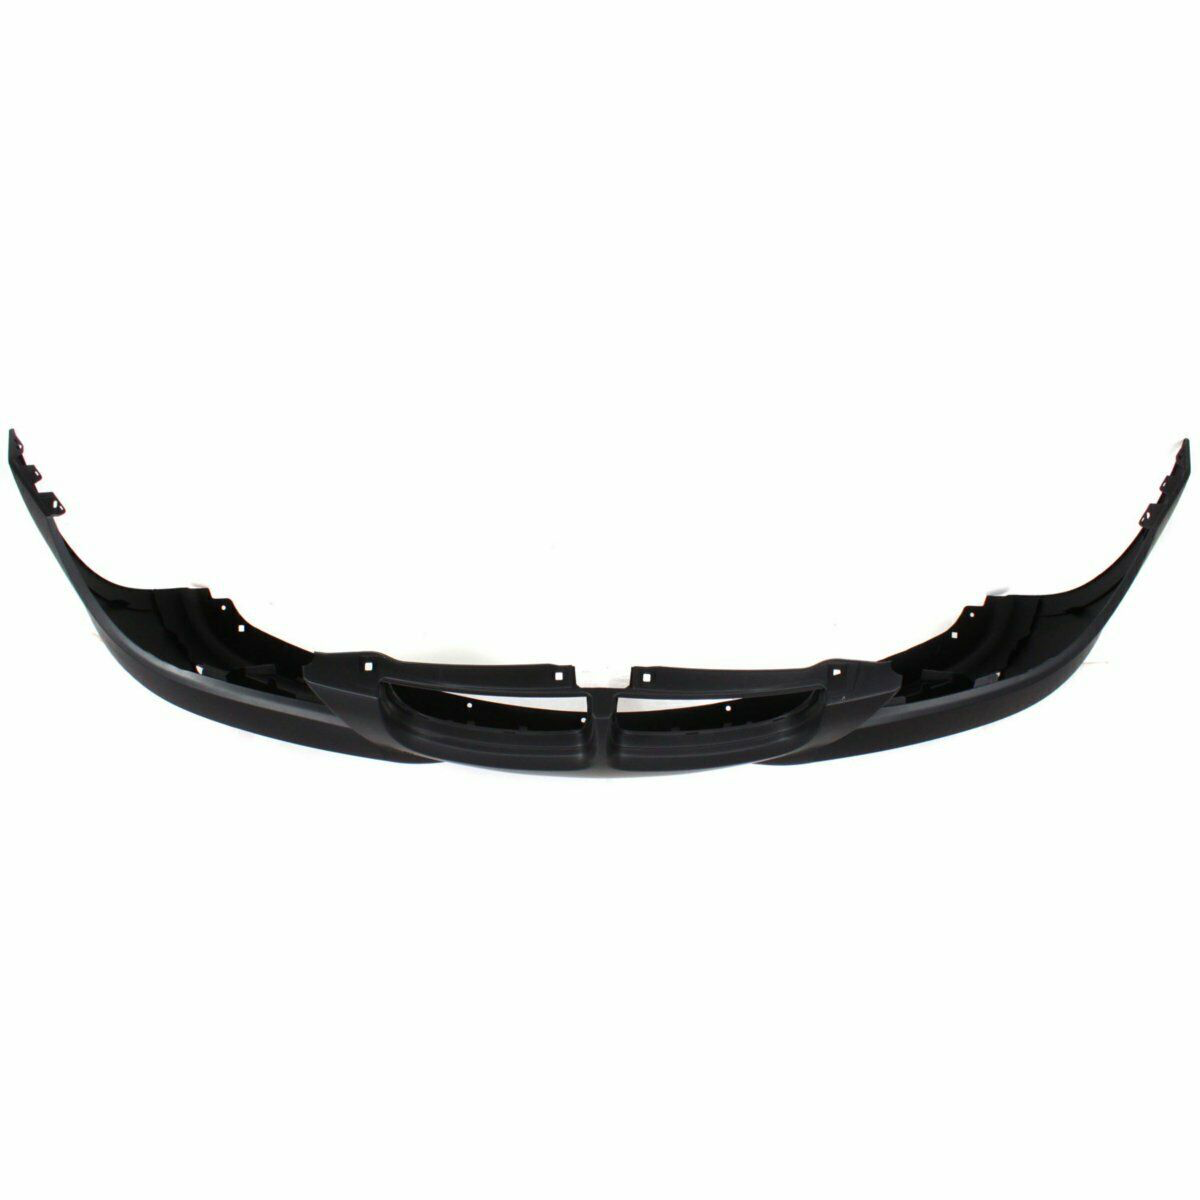 2006-2008 BMW 3 series Sedan Front Bumper w/Prk Snsr Holes Painted to Match